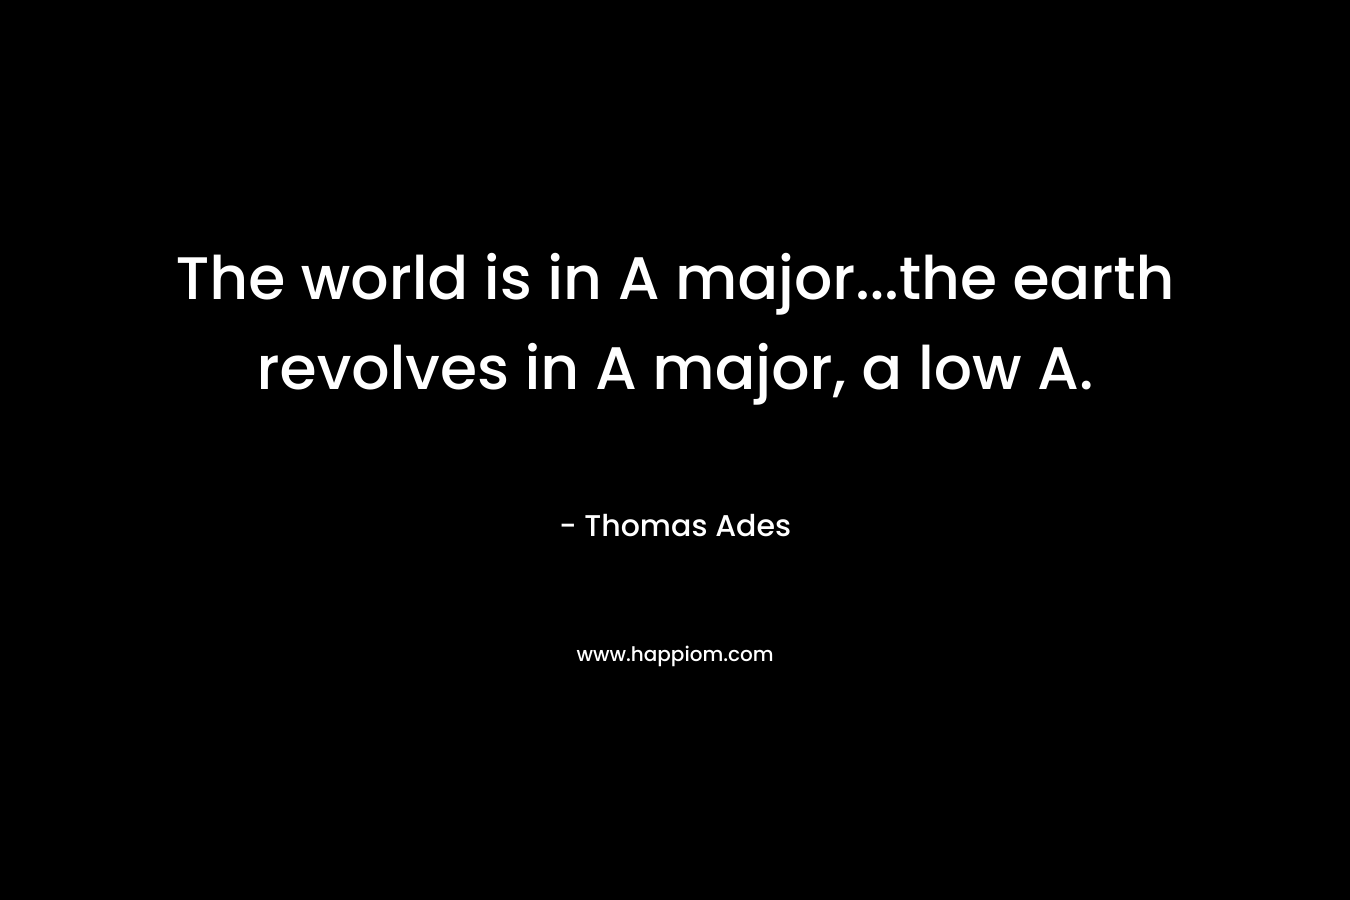 The world is in A major...the earth revolves in A major, a low A.